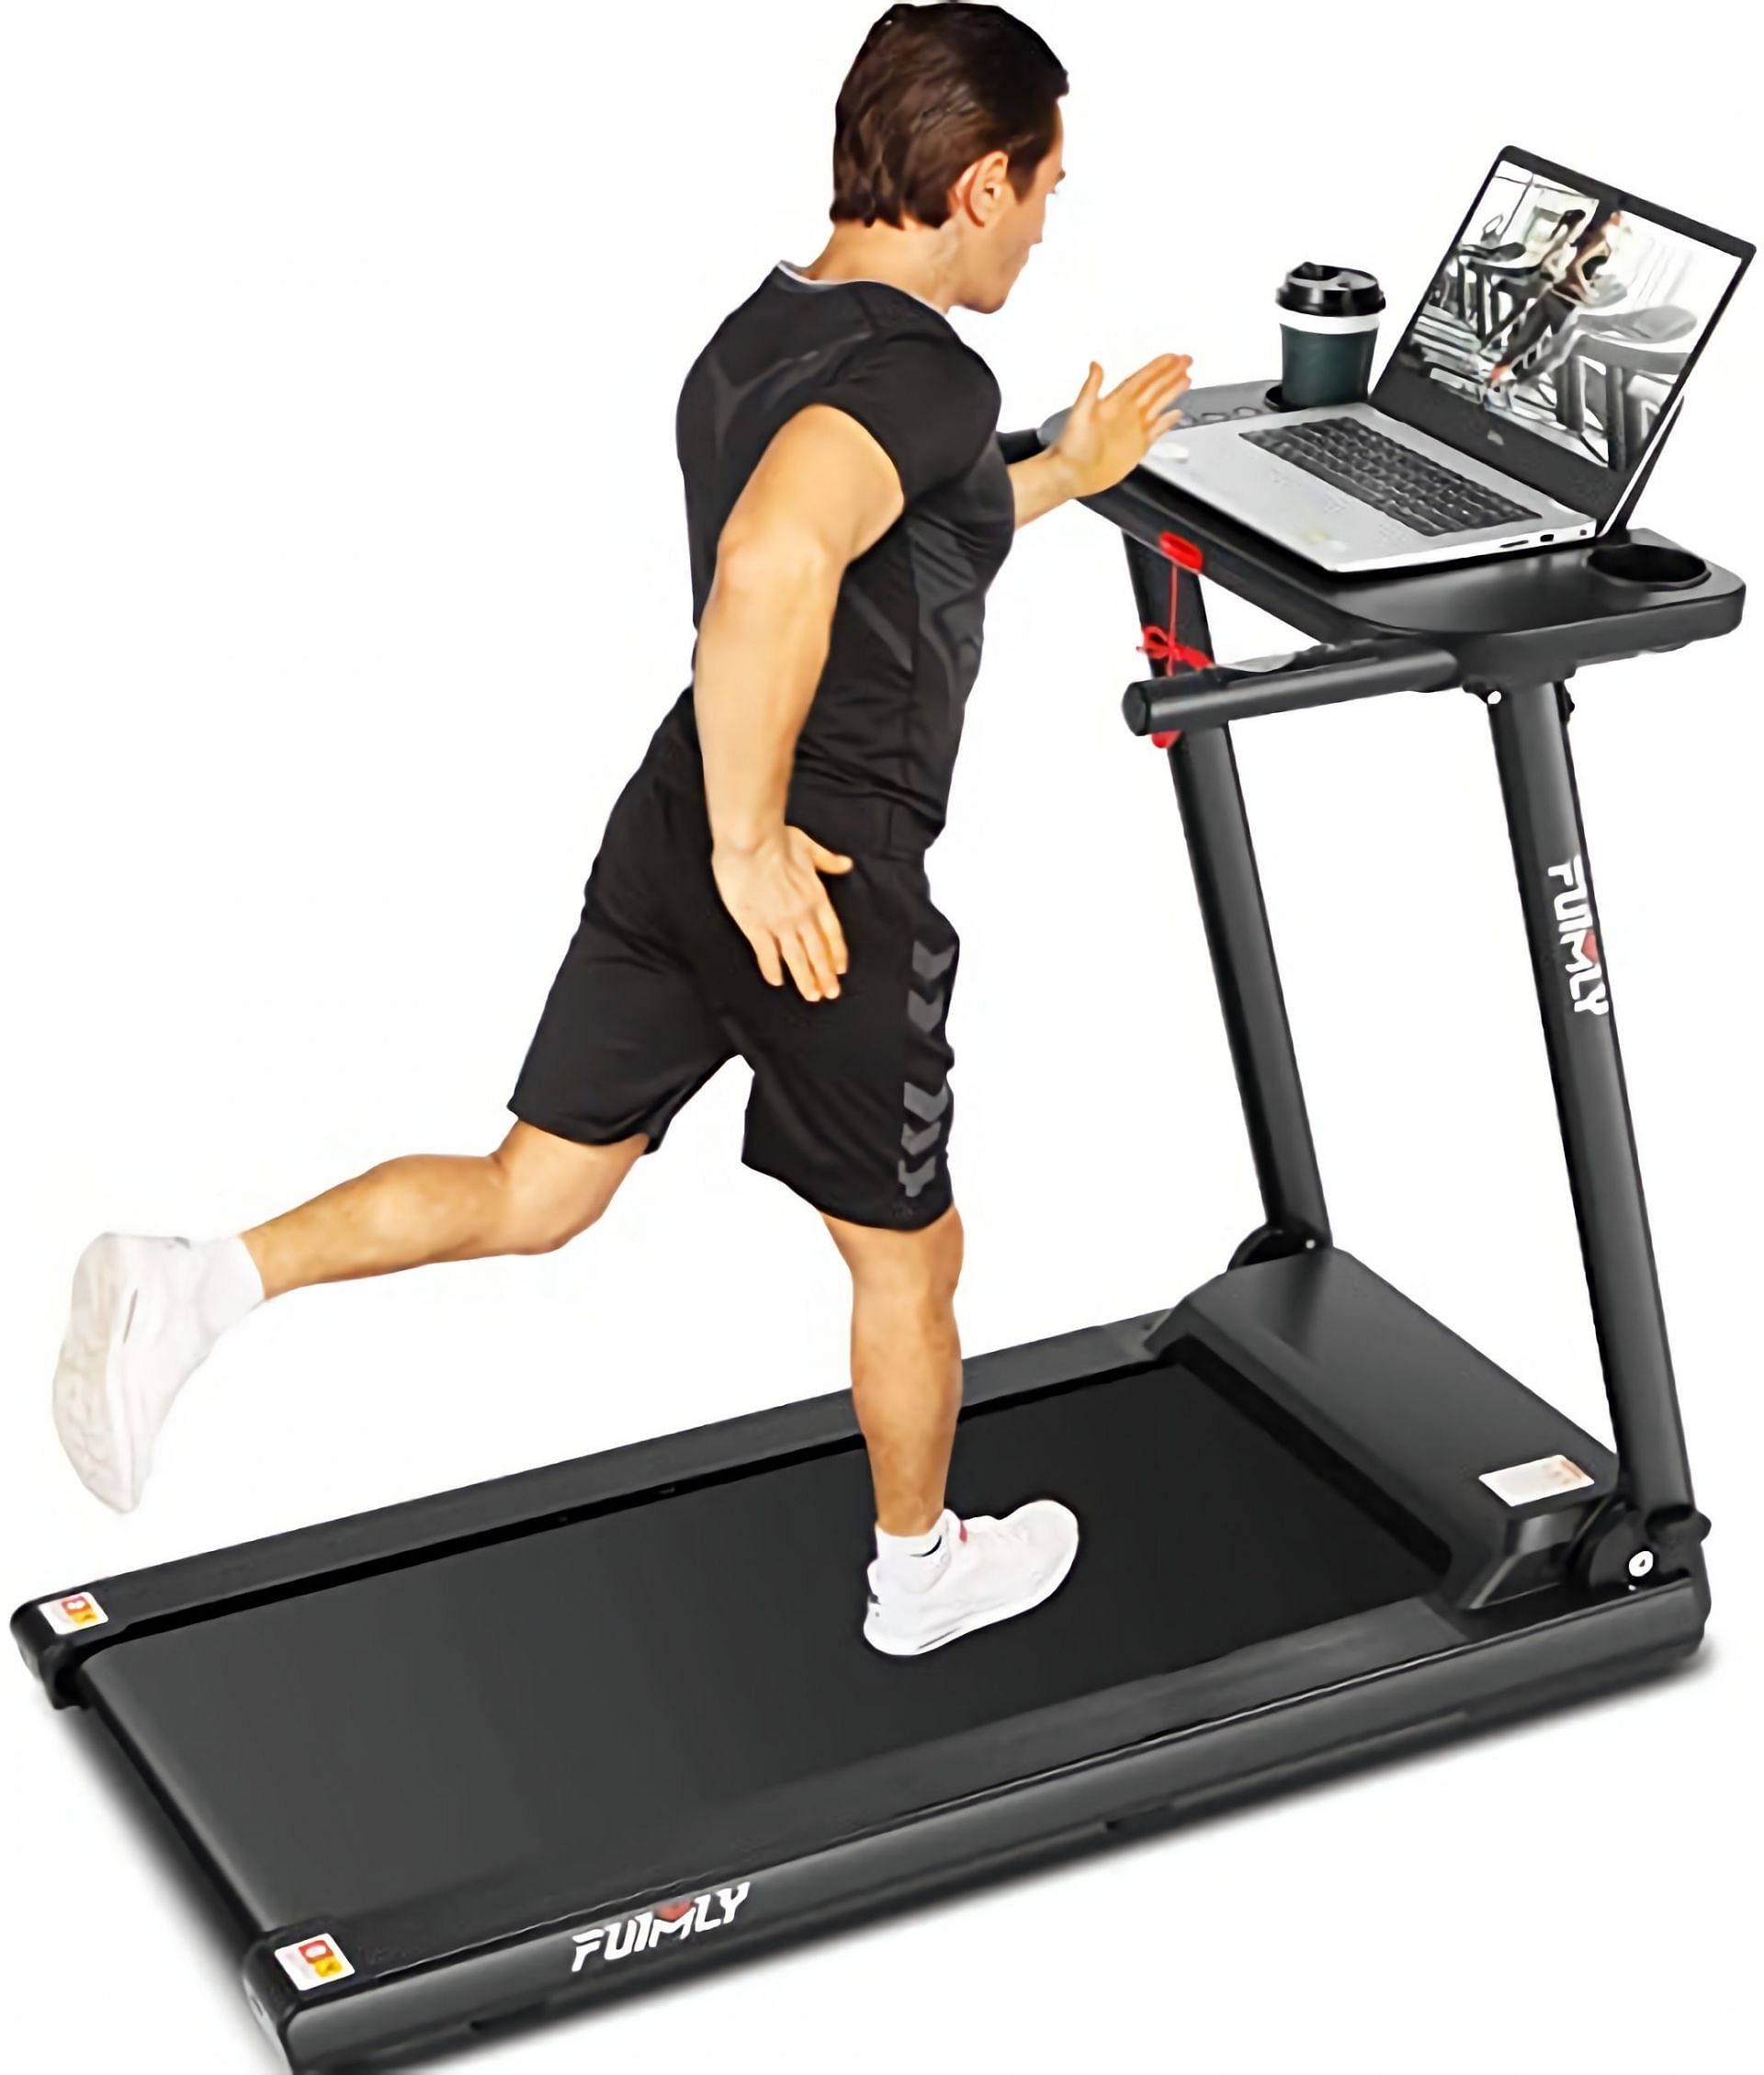 Folding treadmill with large desktop space included